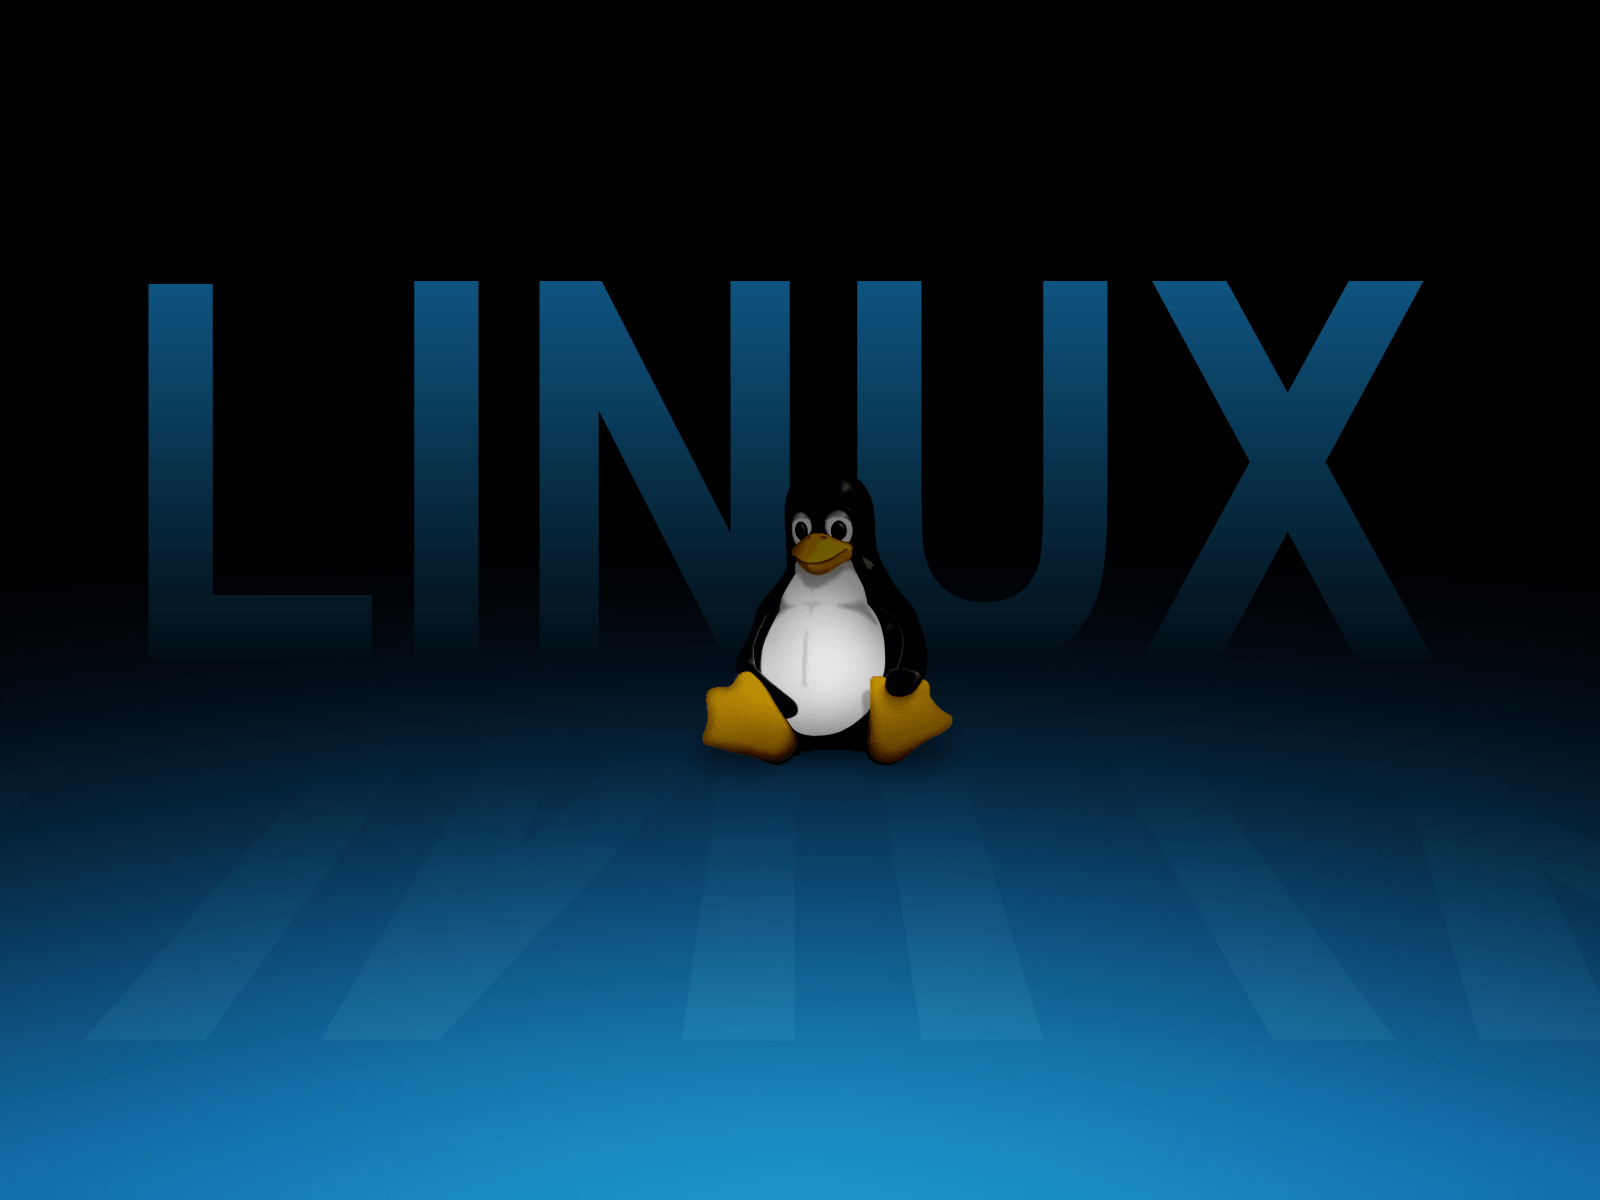 40 Wallpapers Designs Featuring the Linux Mascot